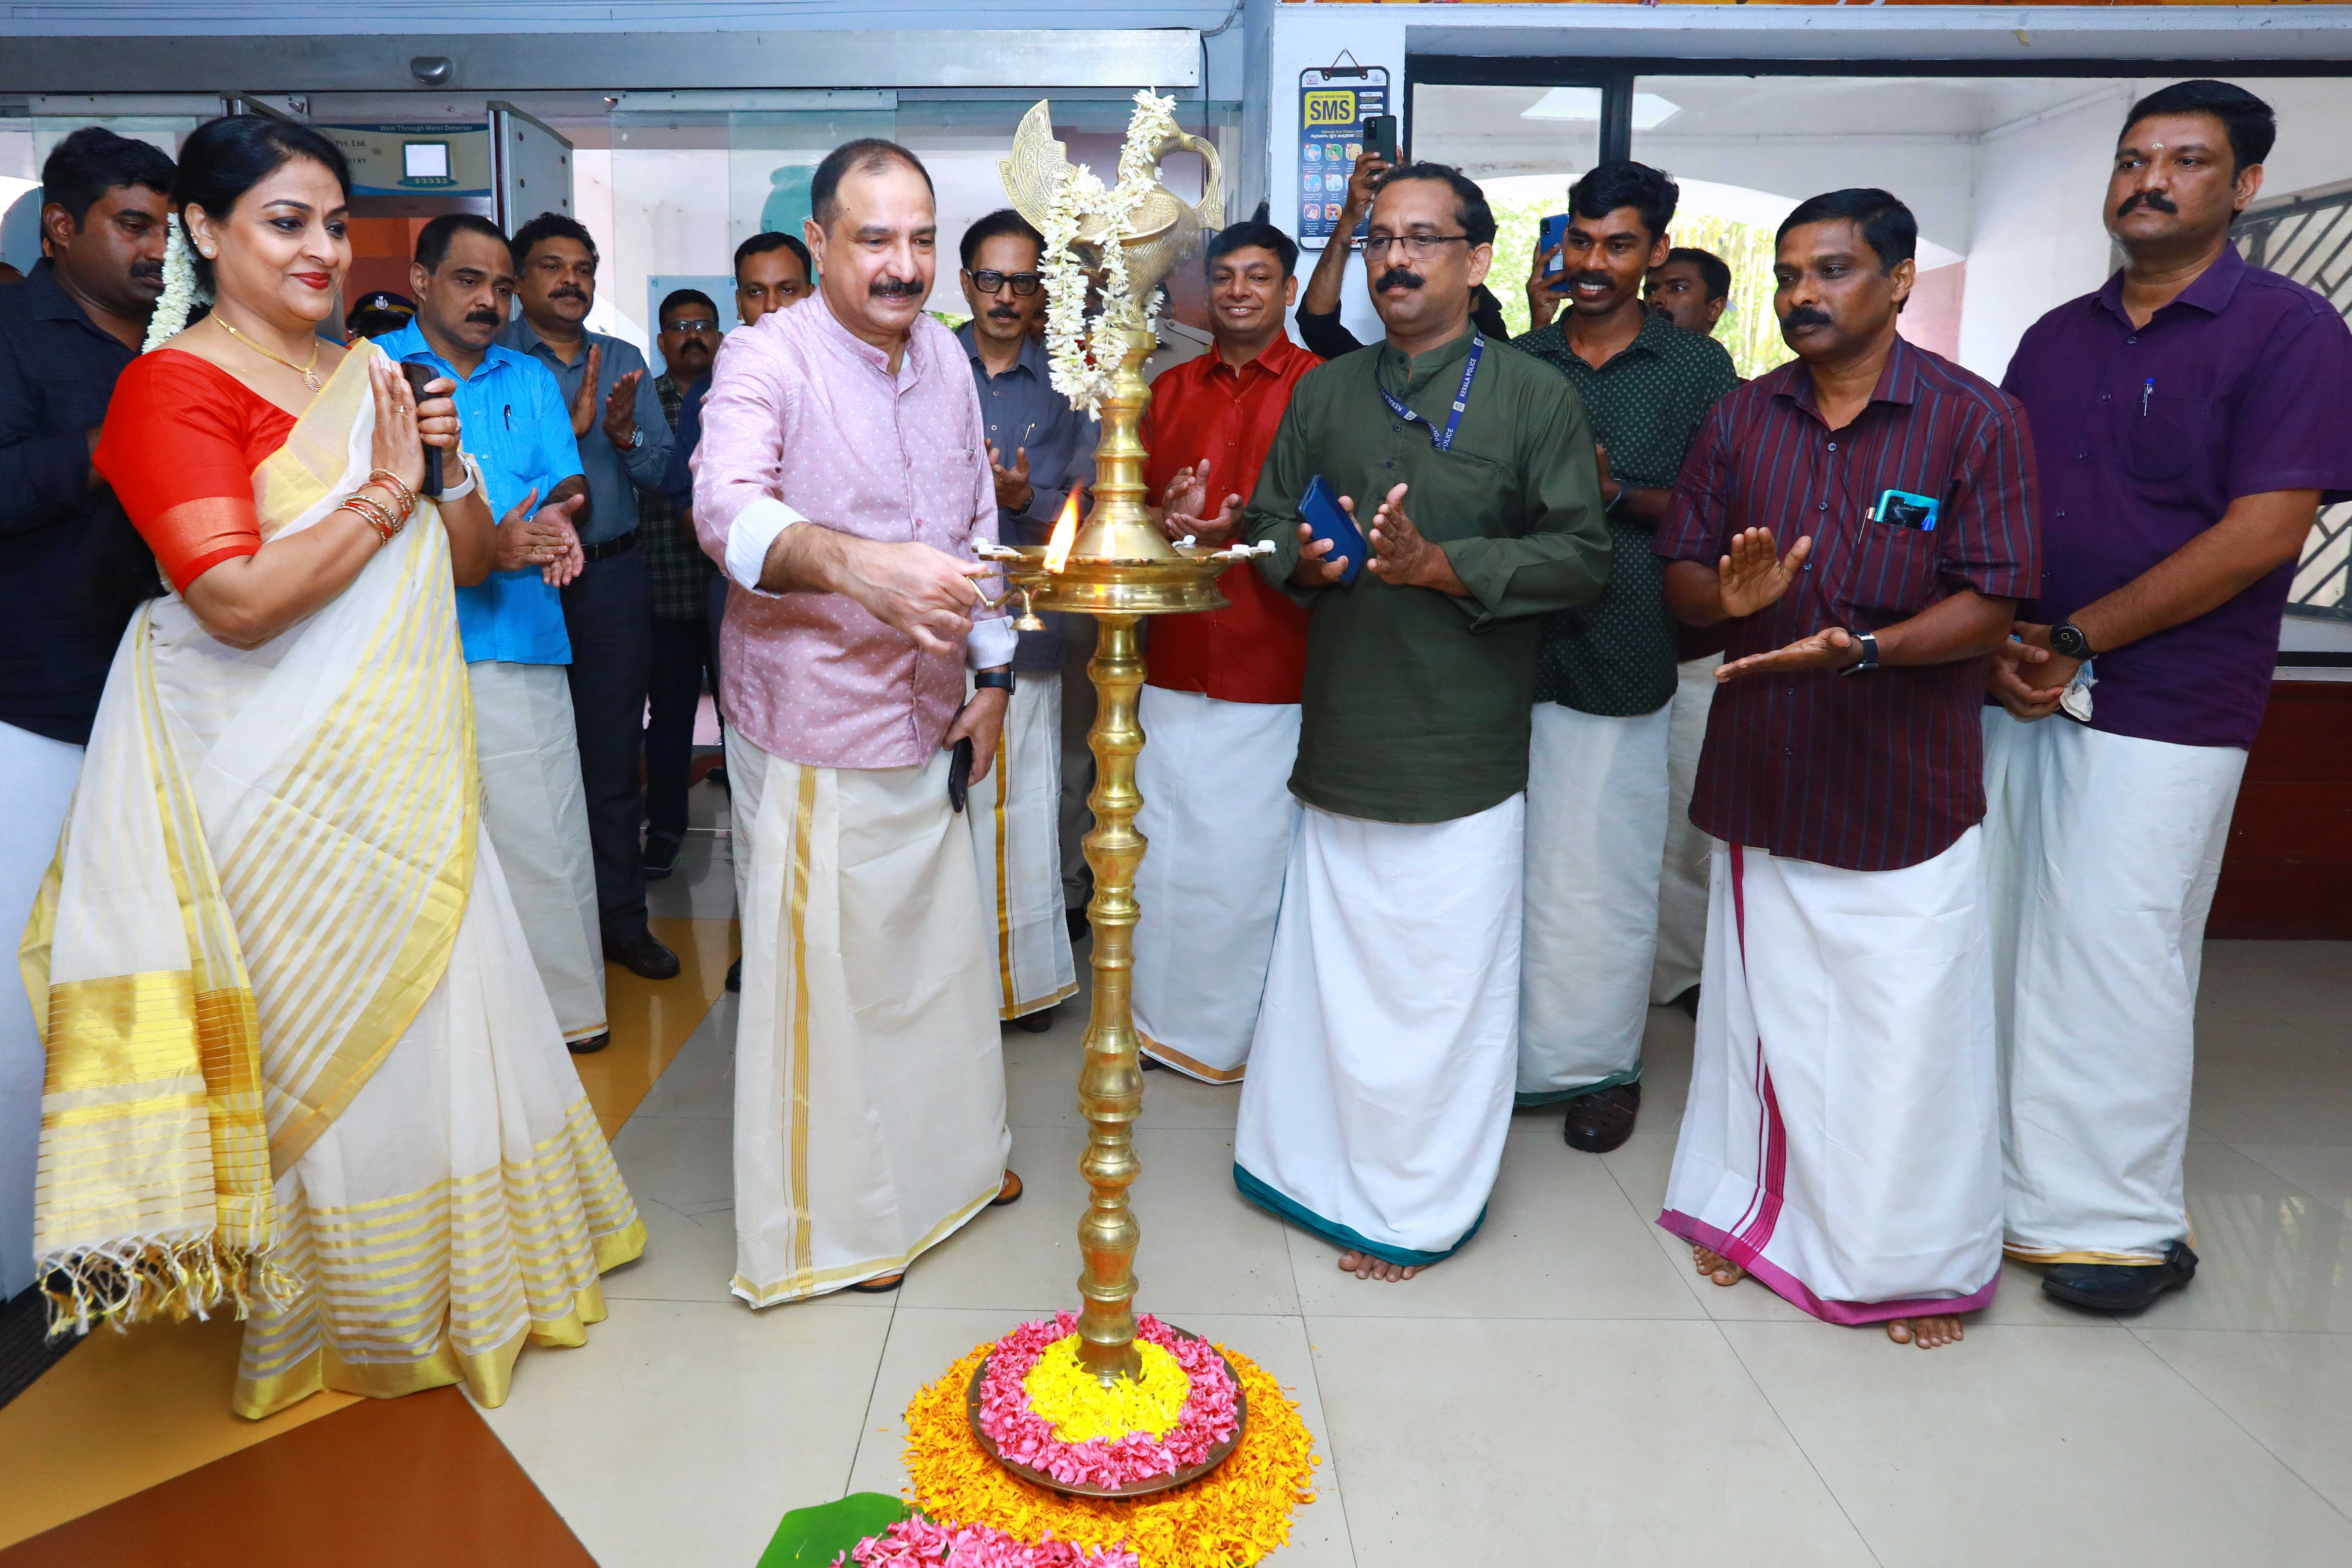 The DGP inaugurated the Onam celebrations at the police headquarters